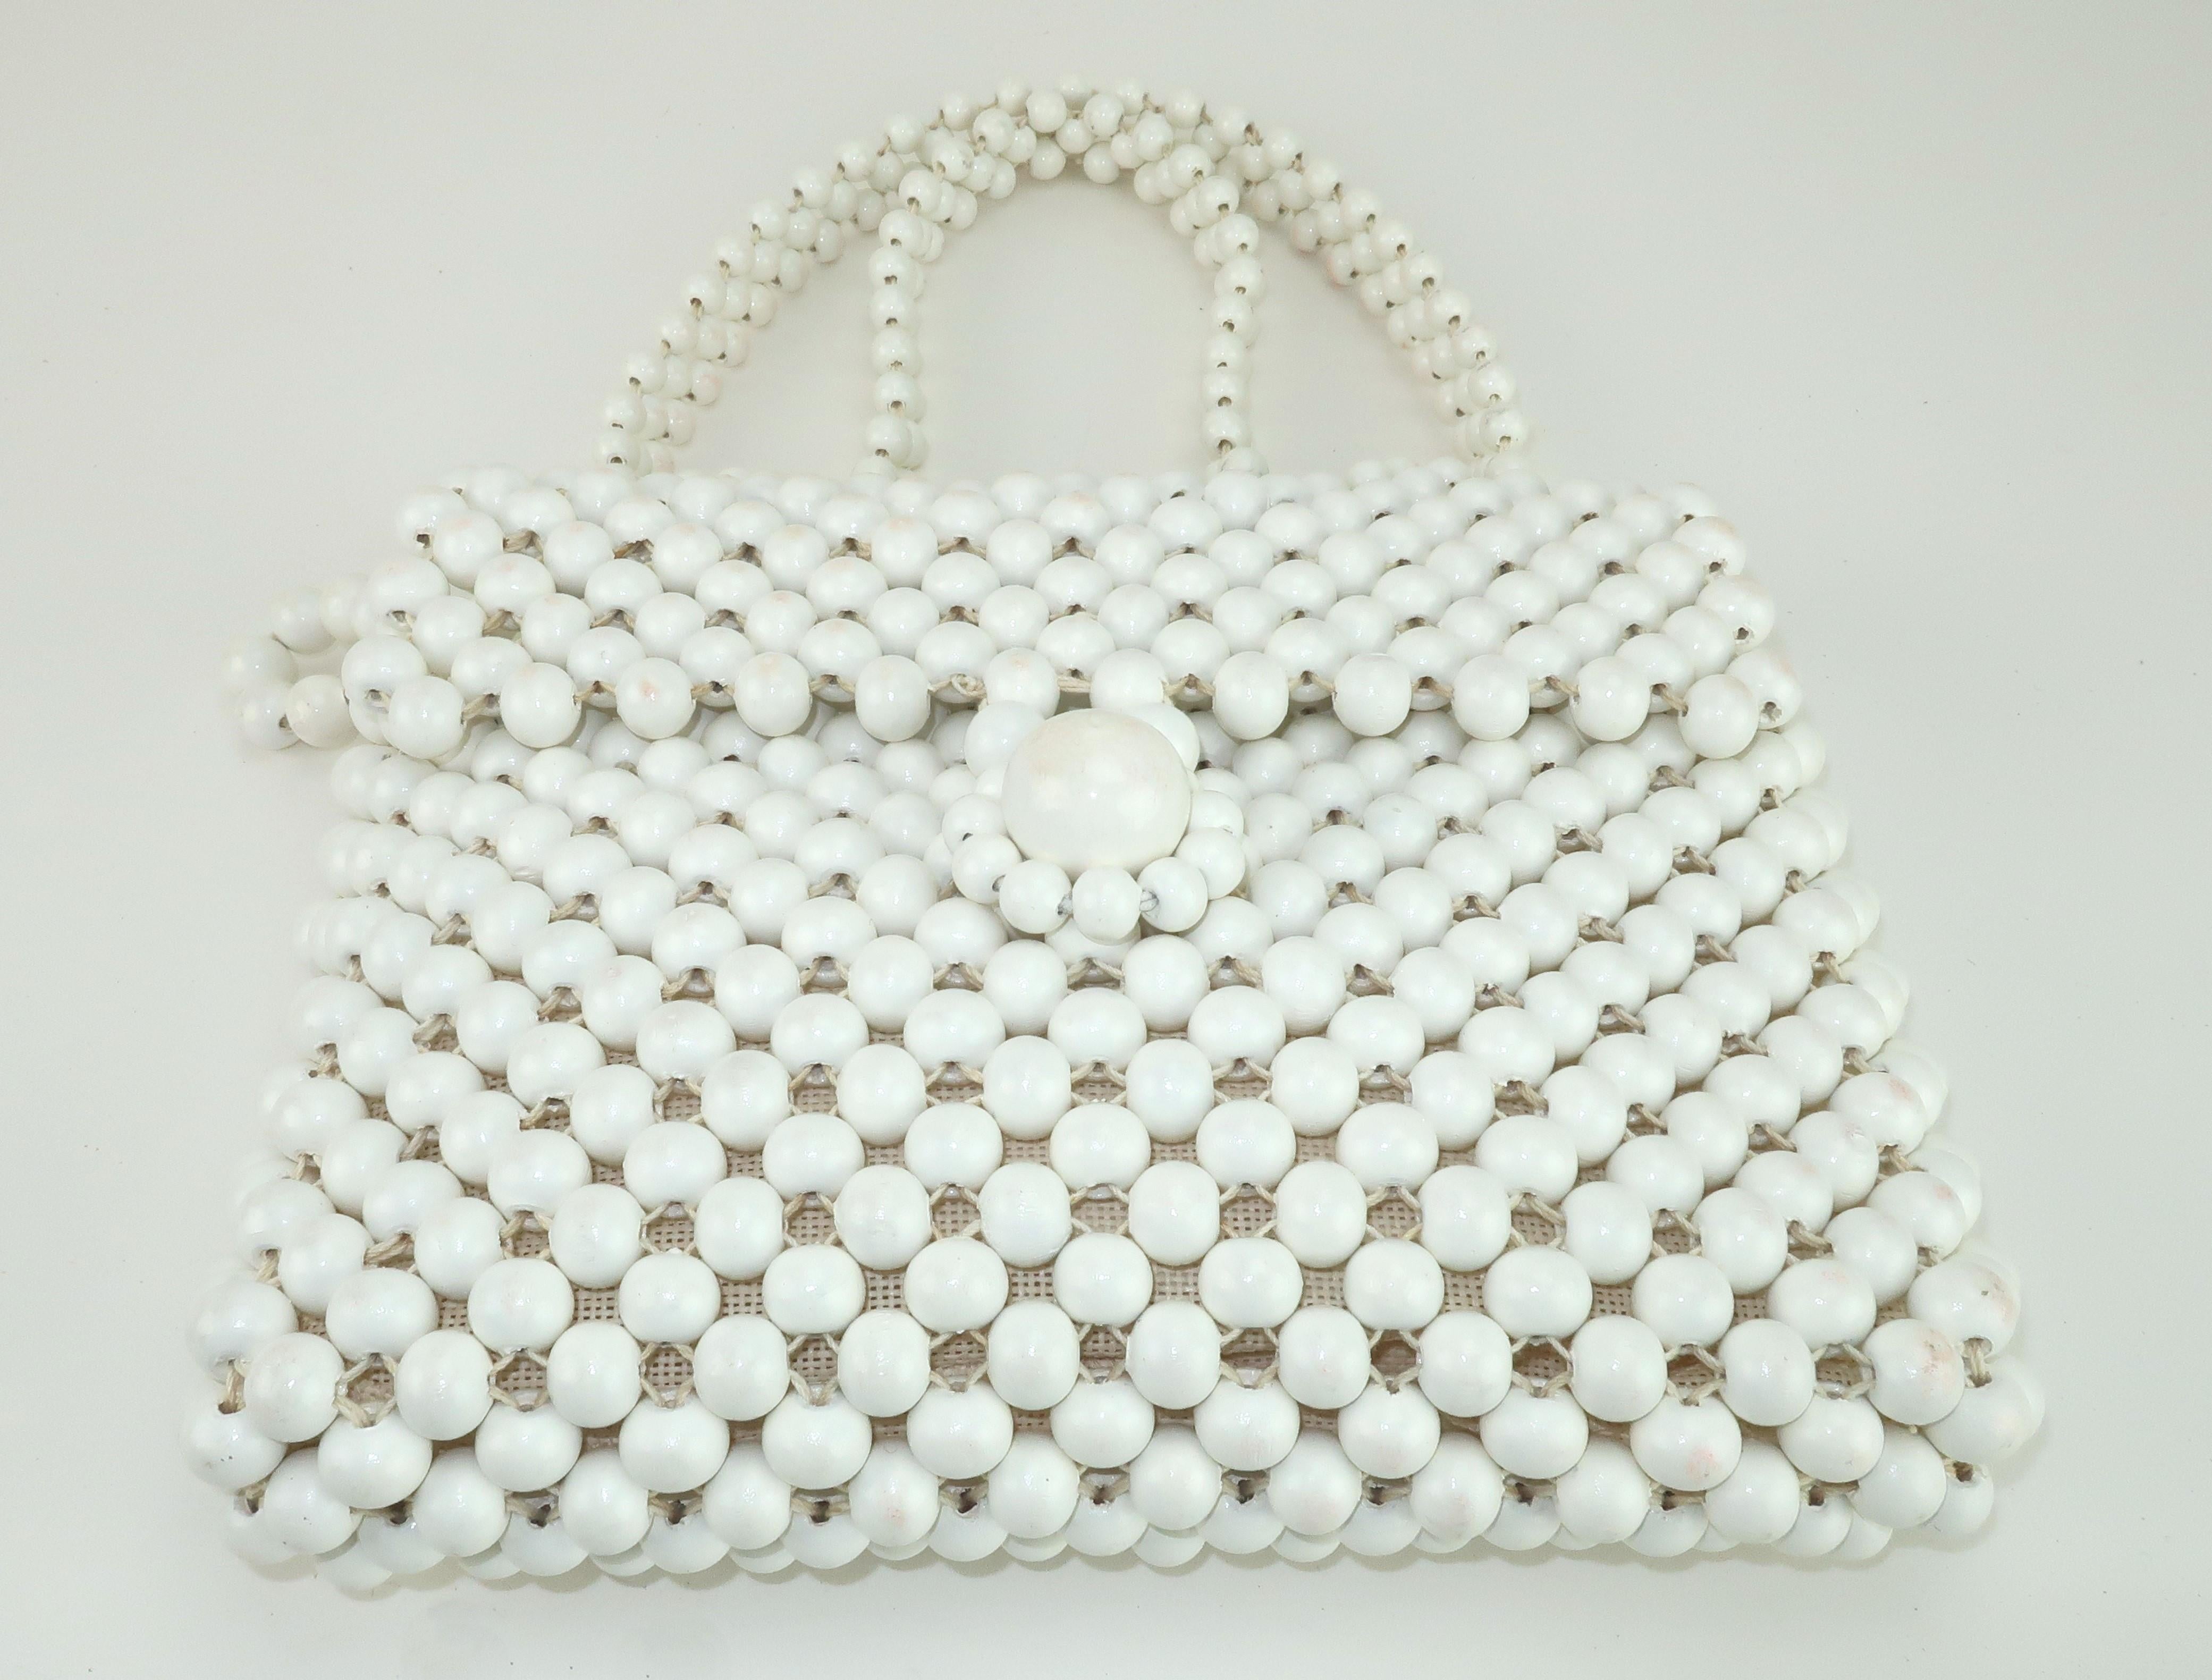 Jana is best known for producing Emilio Pucci's handbags in the 1960's and 1970's.  No doubt they have the 1960's mod style down to a perfect science and this fun handbag is a great example of that look.  The white painted wood beads are woven